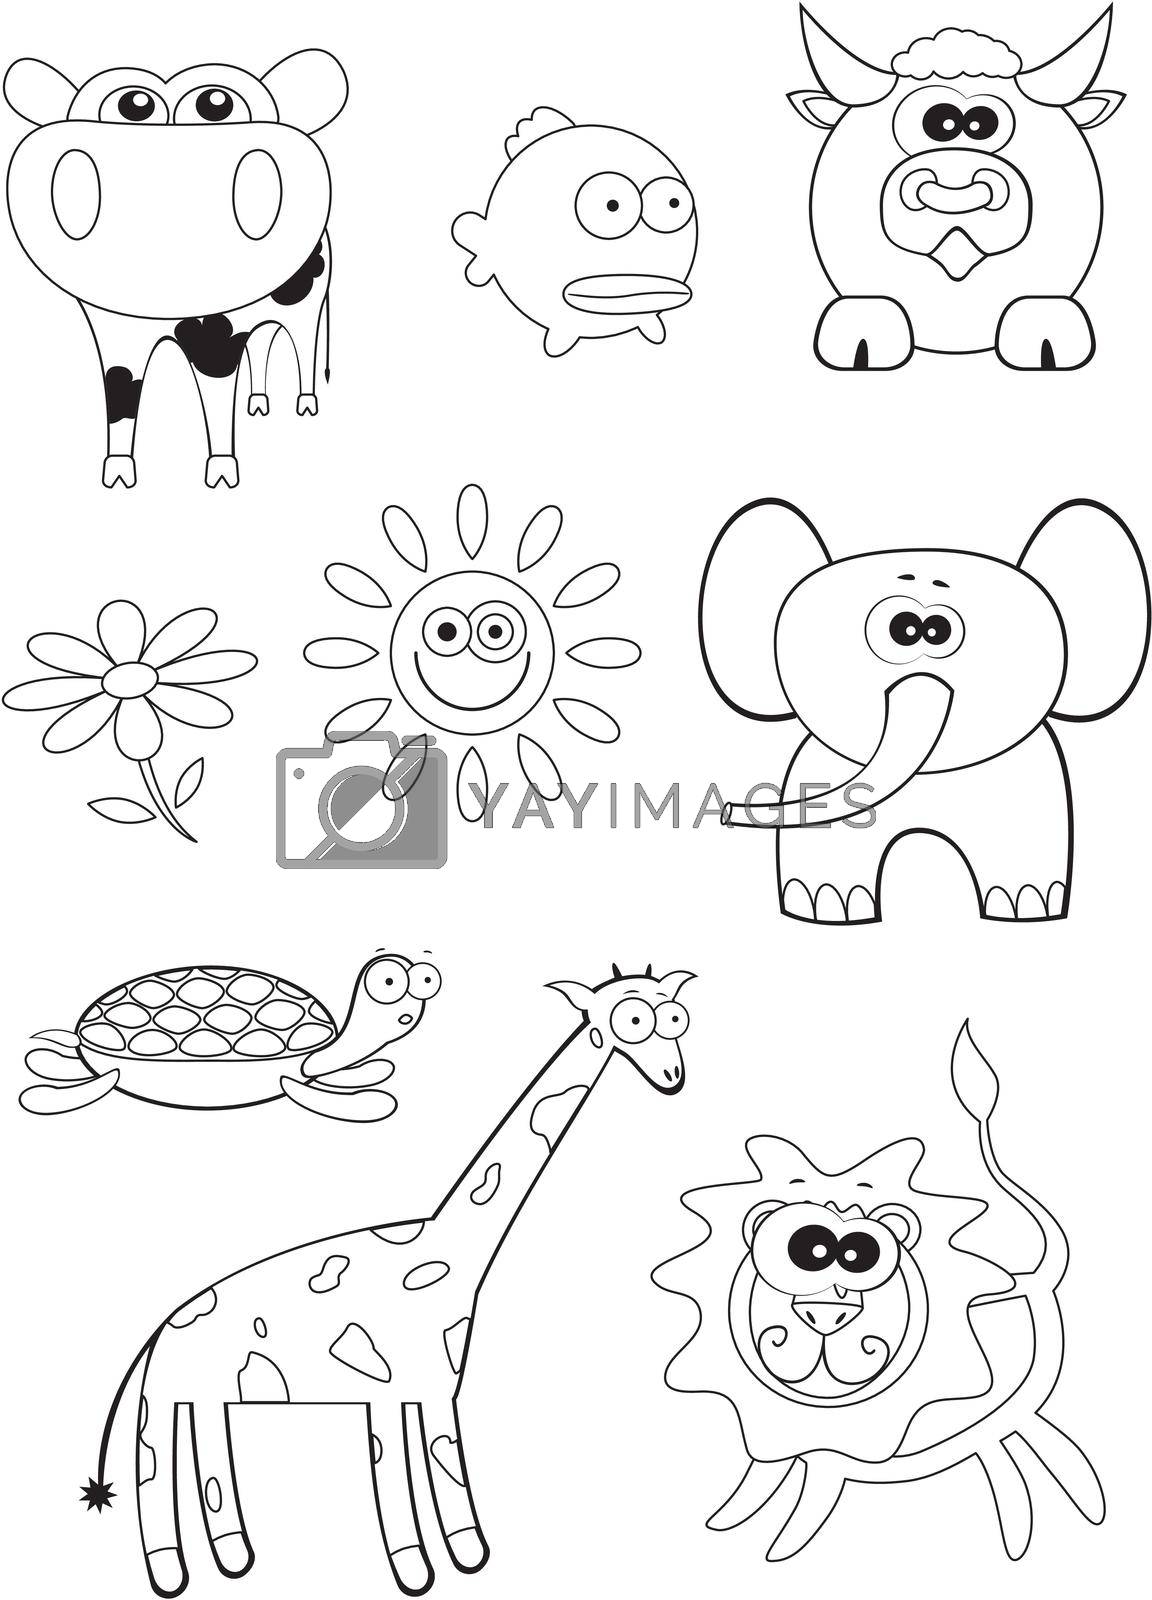 Cartoon goggle-eyed animals coloring book for children. Vector print ready A4 page